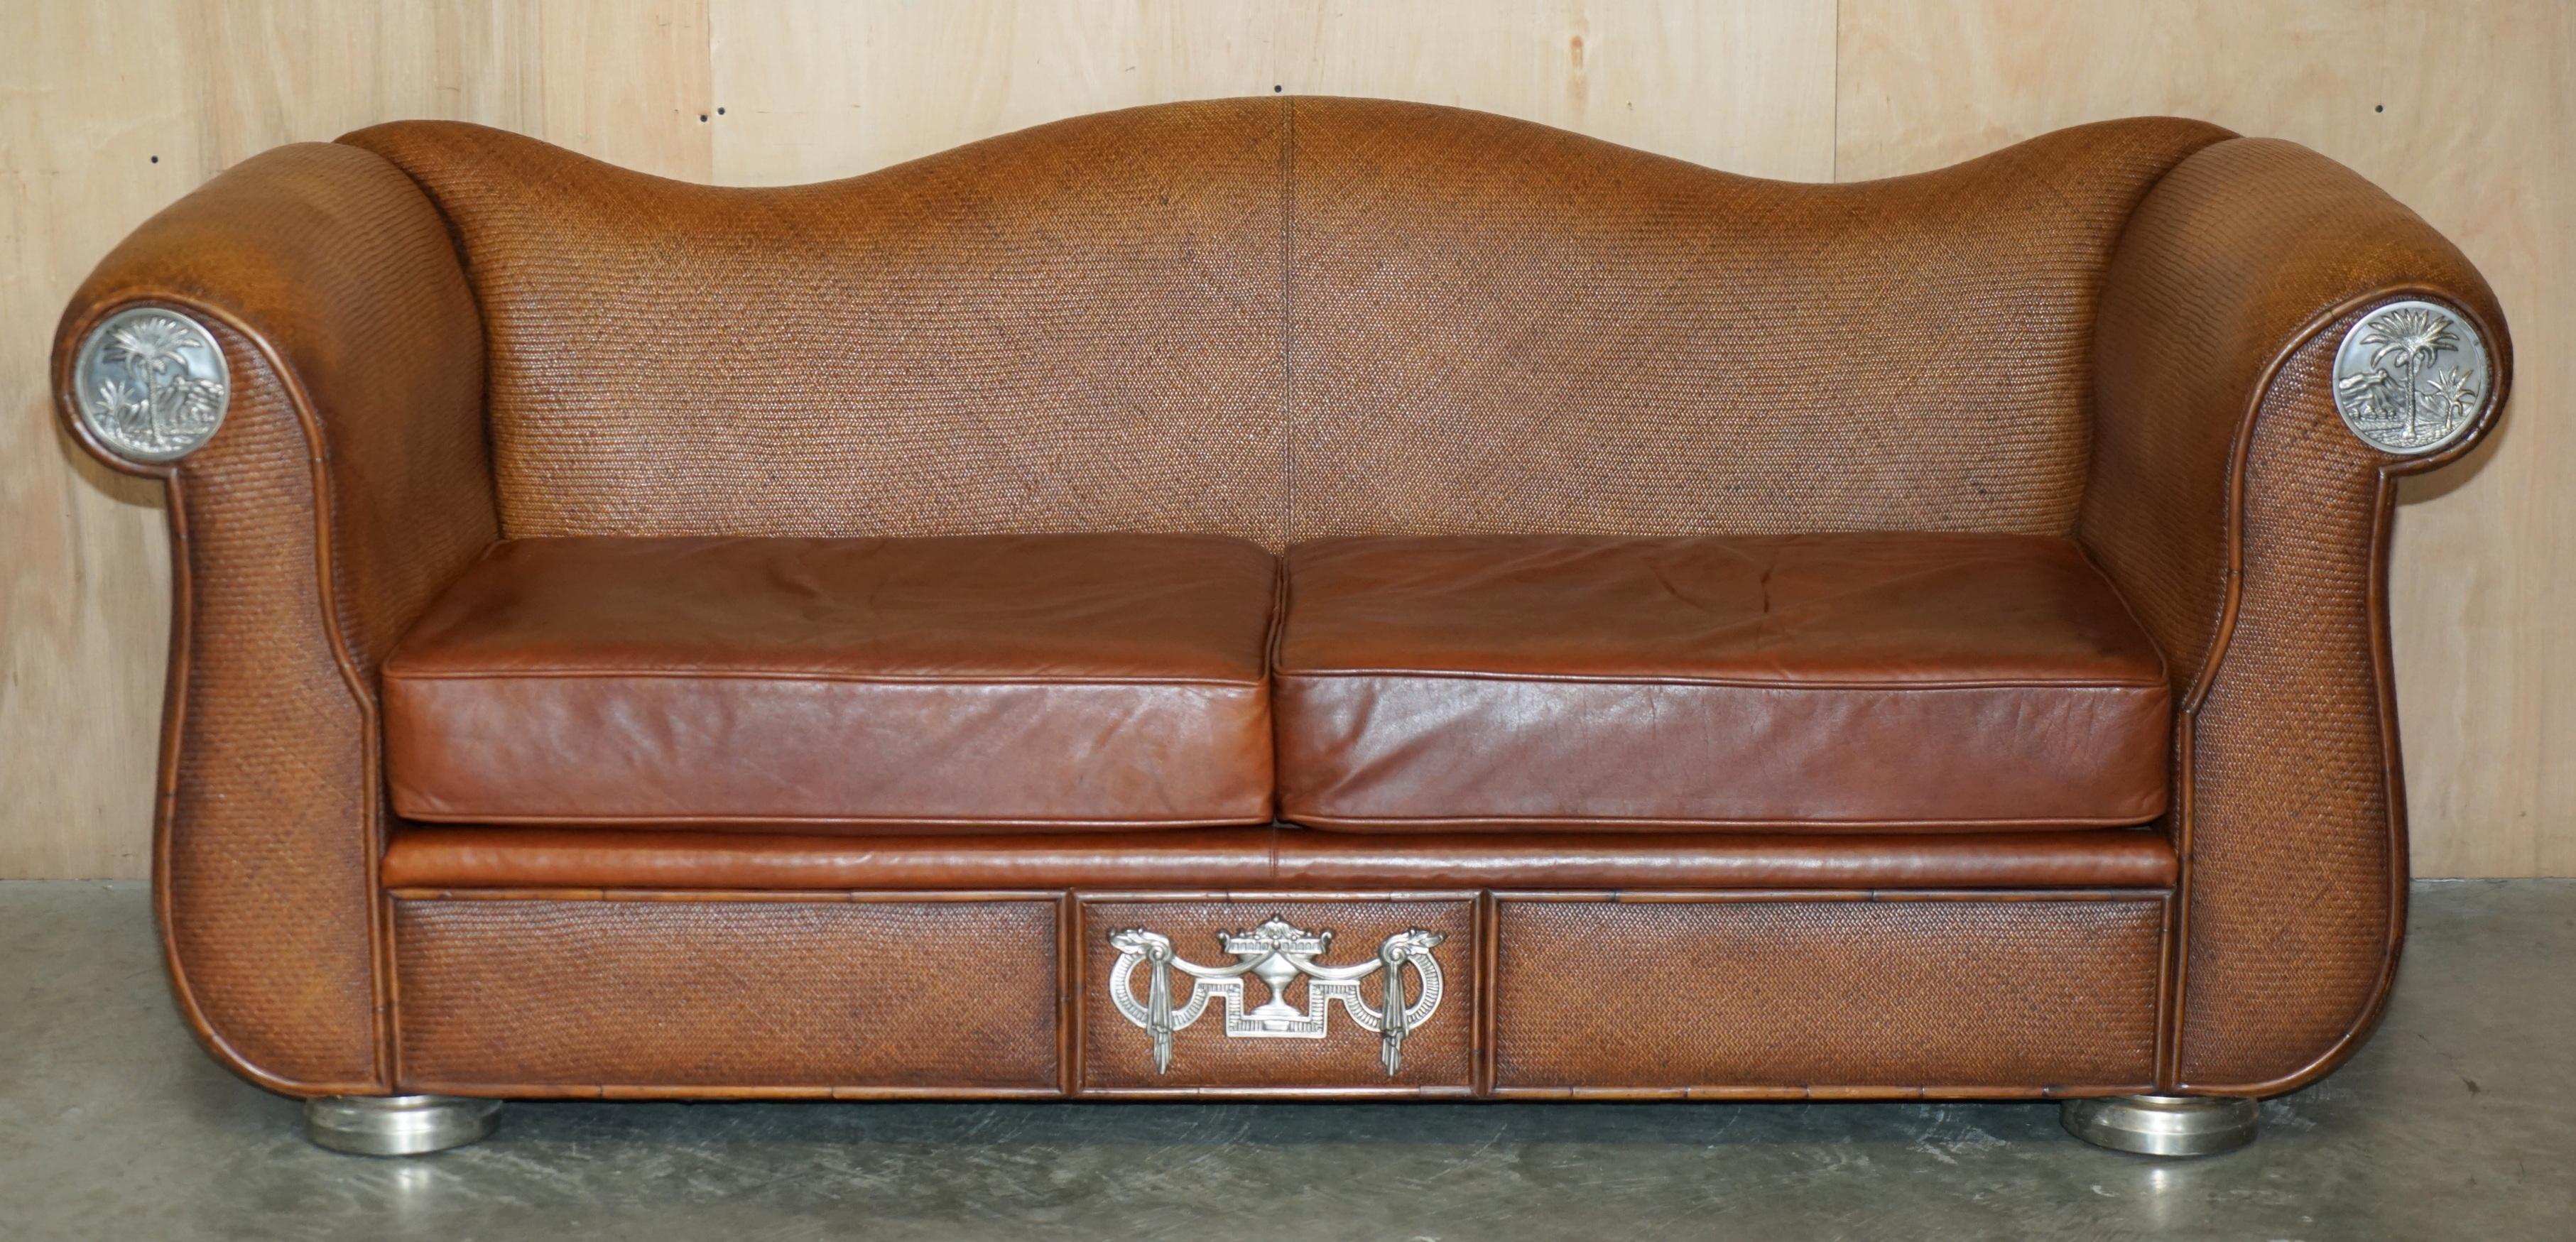 RARE PAIR OF THOMASVILLE SAFARI BROWN LEATHER WOVEN SOFAS PART OF LARGE SUITe For Sale 4